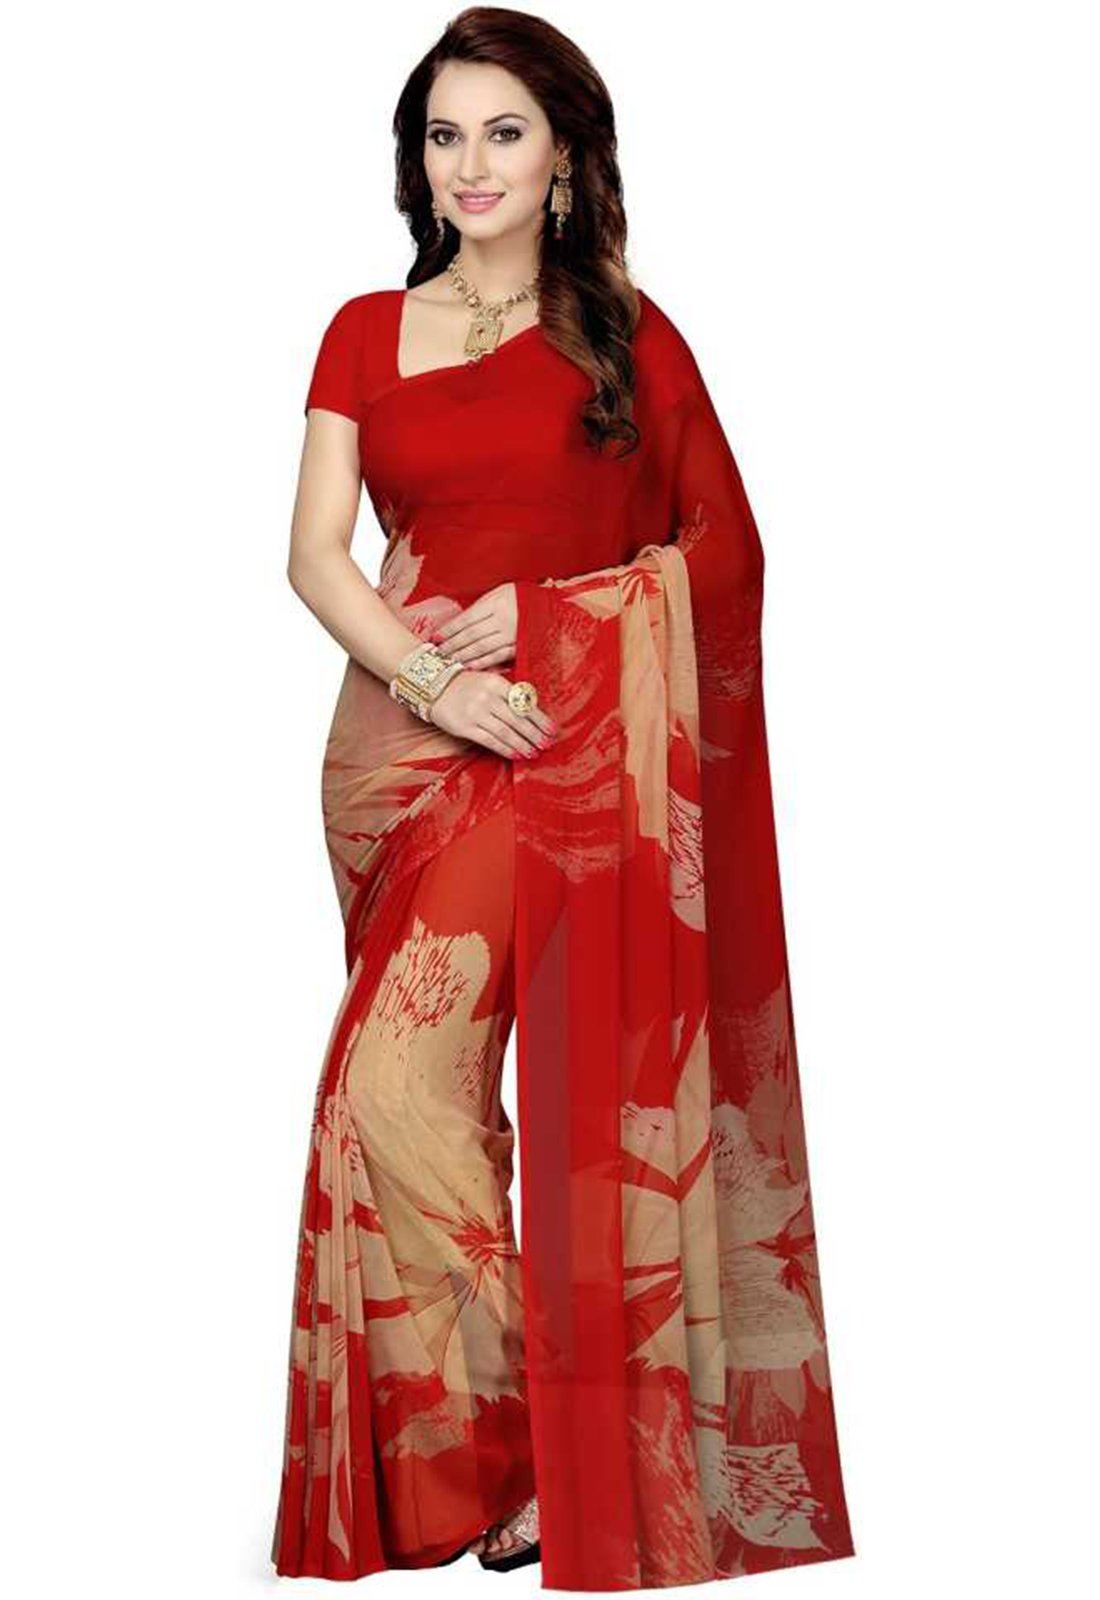 Ishin Combo of 2 Poly Georgette Printed Women's Saree